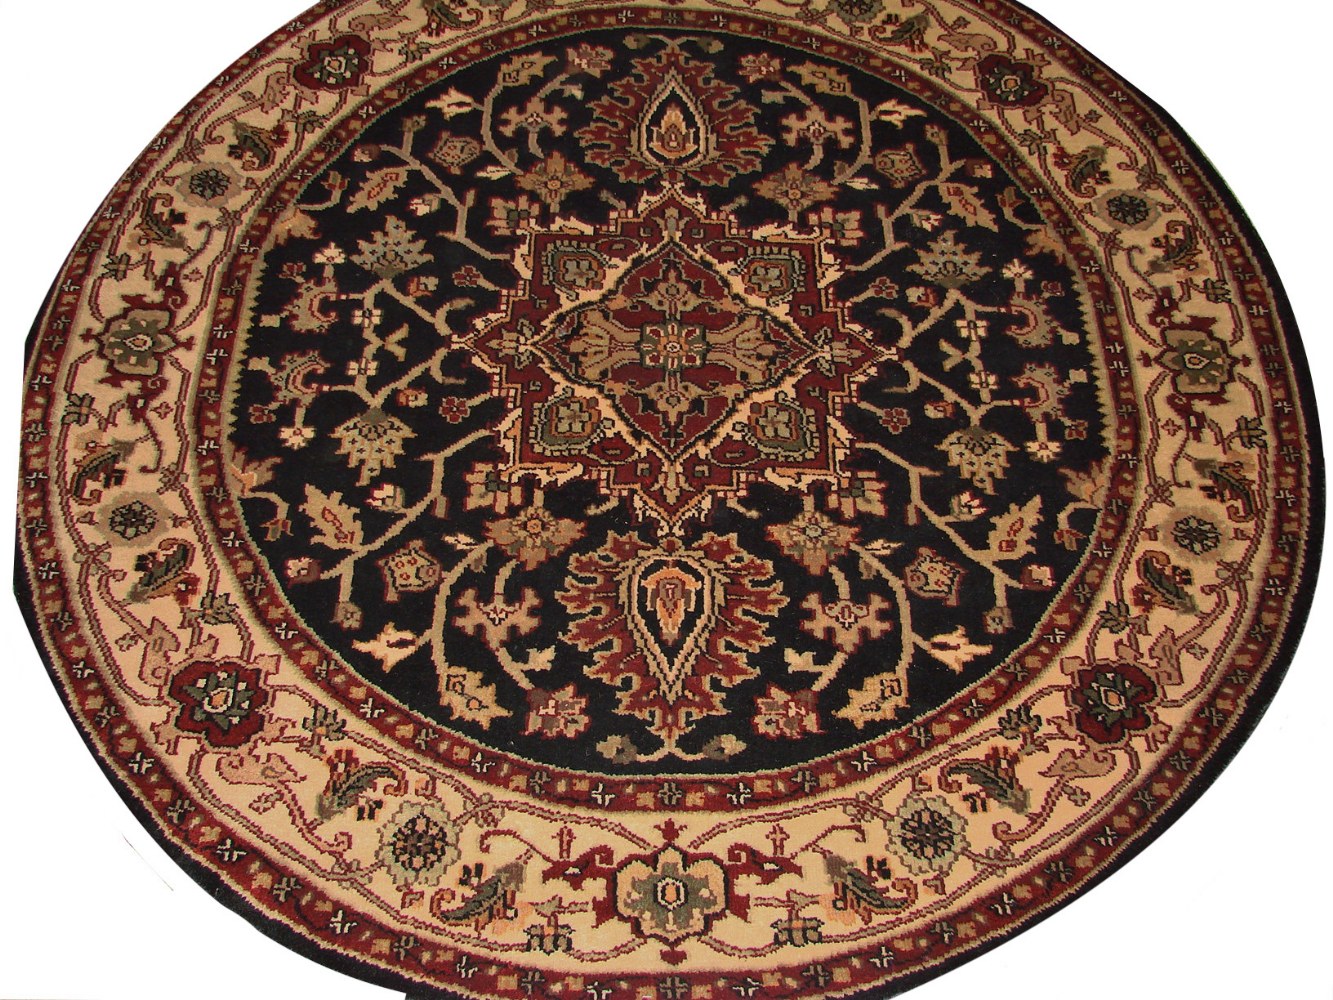 6 ft. - 7 ft. Round & Square Heriz/Serapi Hand Knotted Wool Area Rug - MR0883